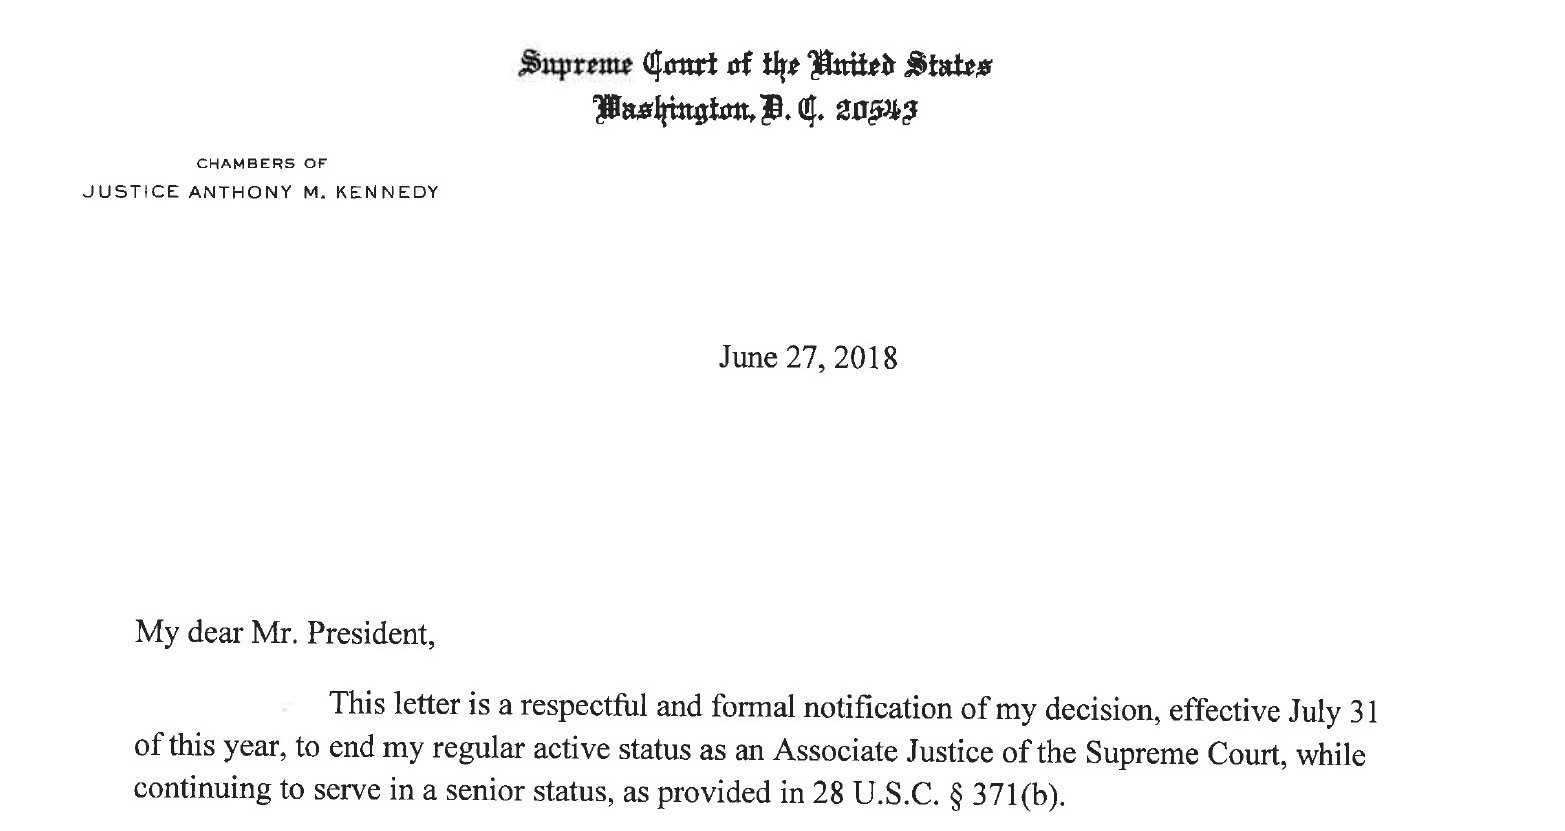 Document: Read Justice Kennedy's letter.